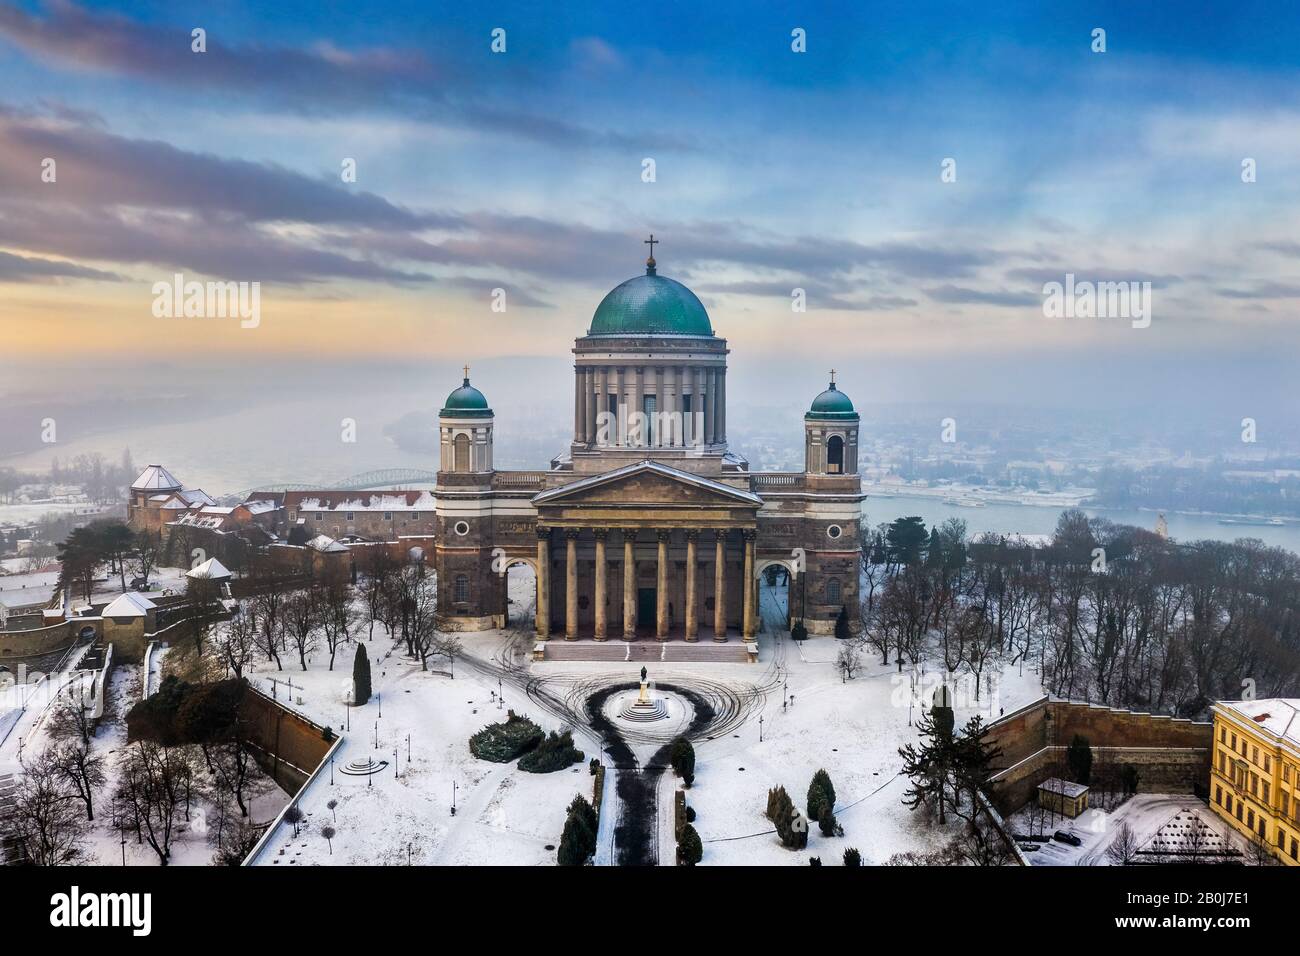 Esztergom, Hungary - Aerial view of the beautiful snowy Basilica of Esztergom with Slovakia at the background on a foggy winter morning Stock Photo